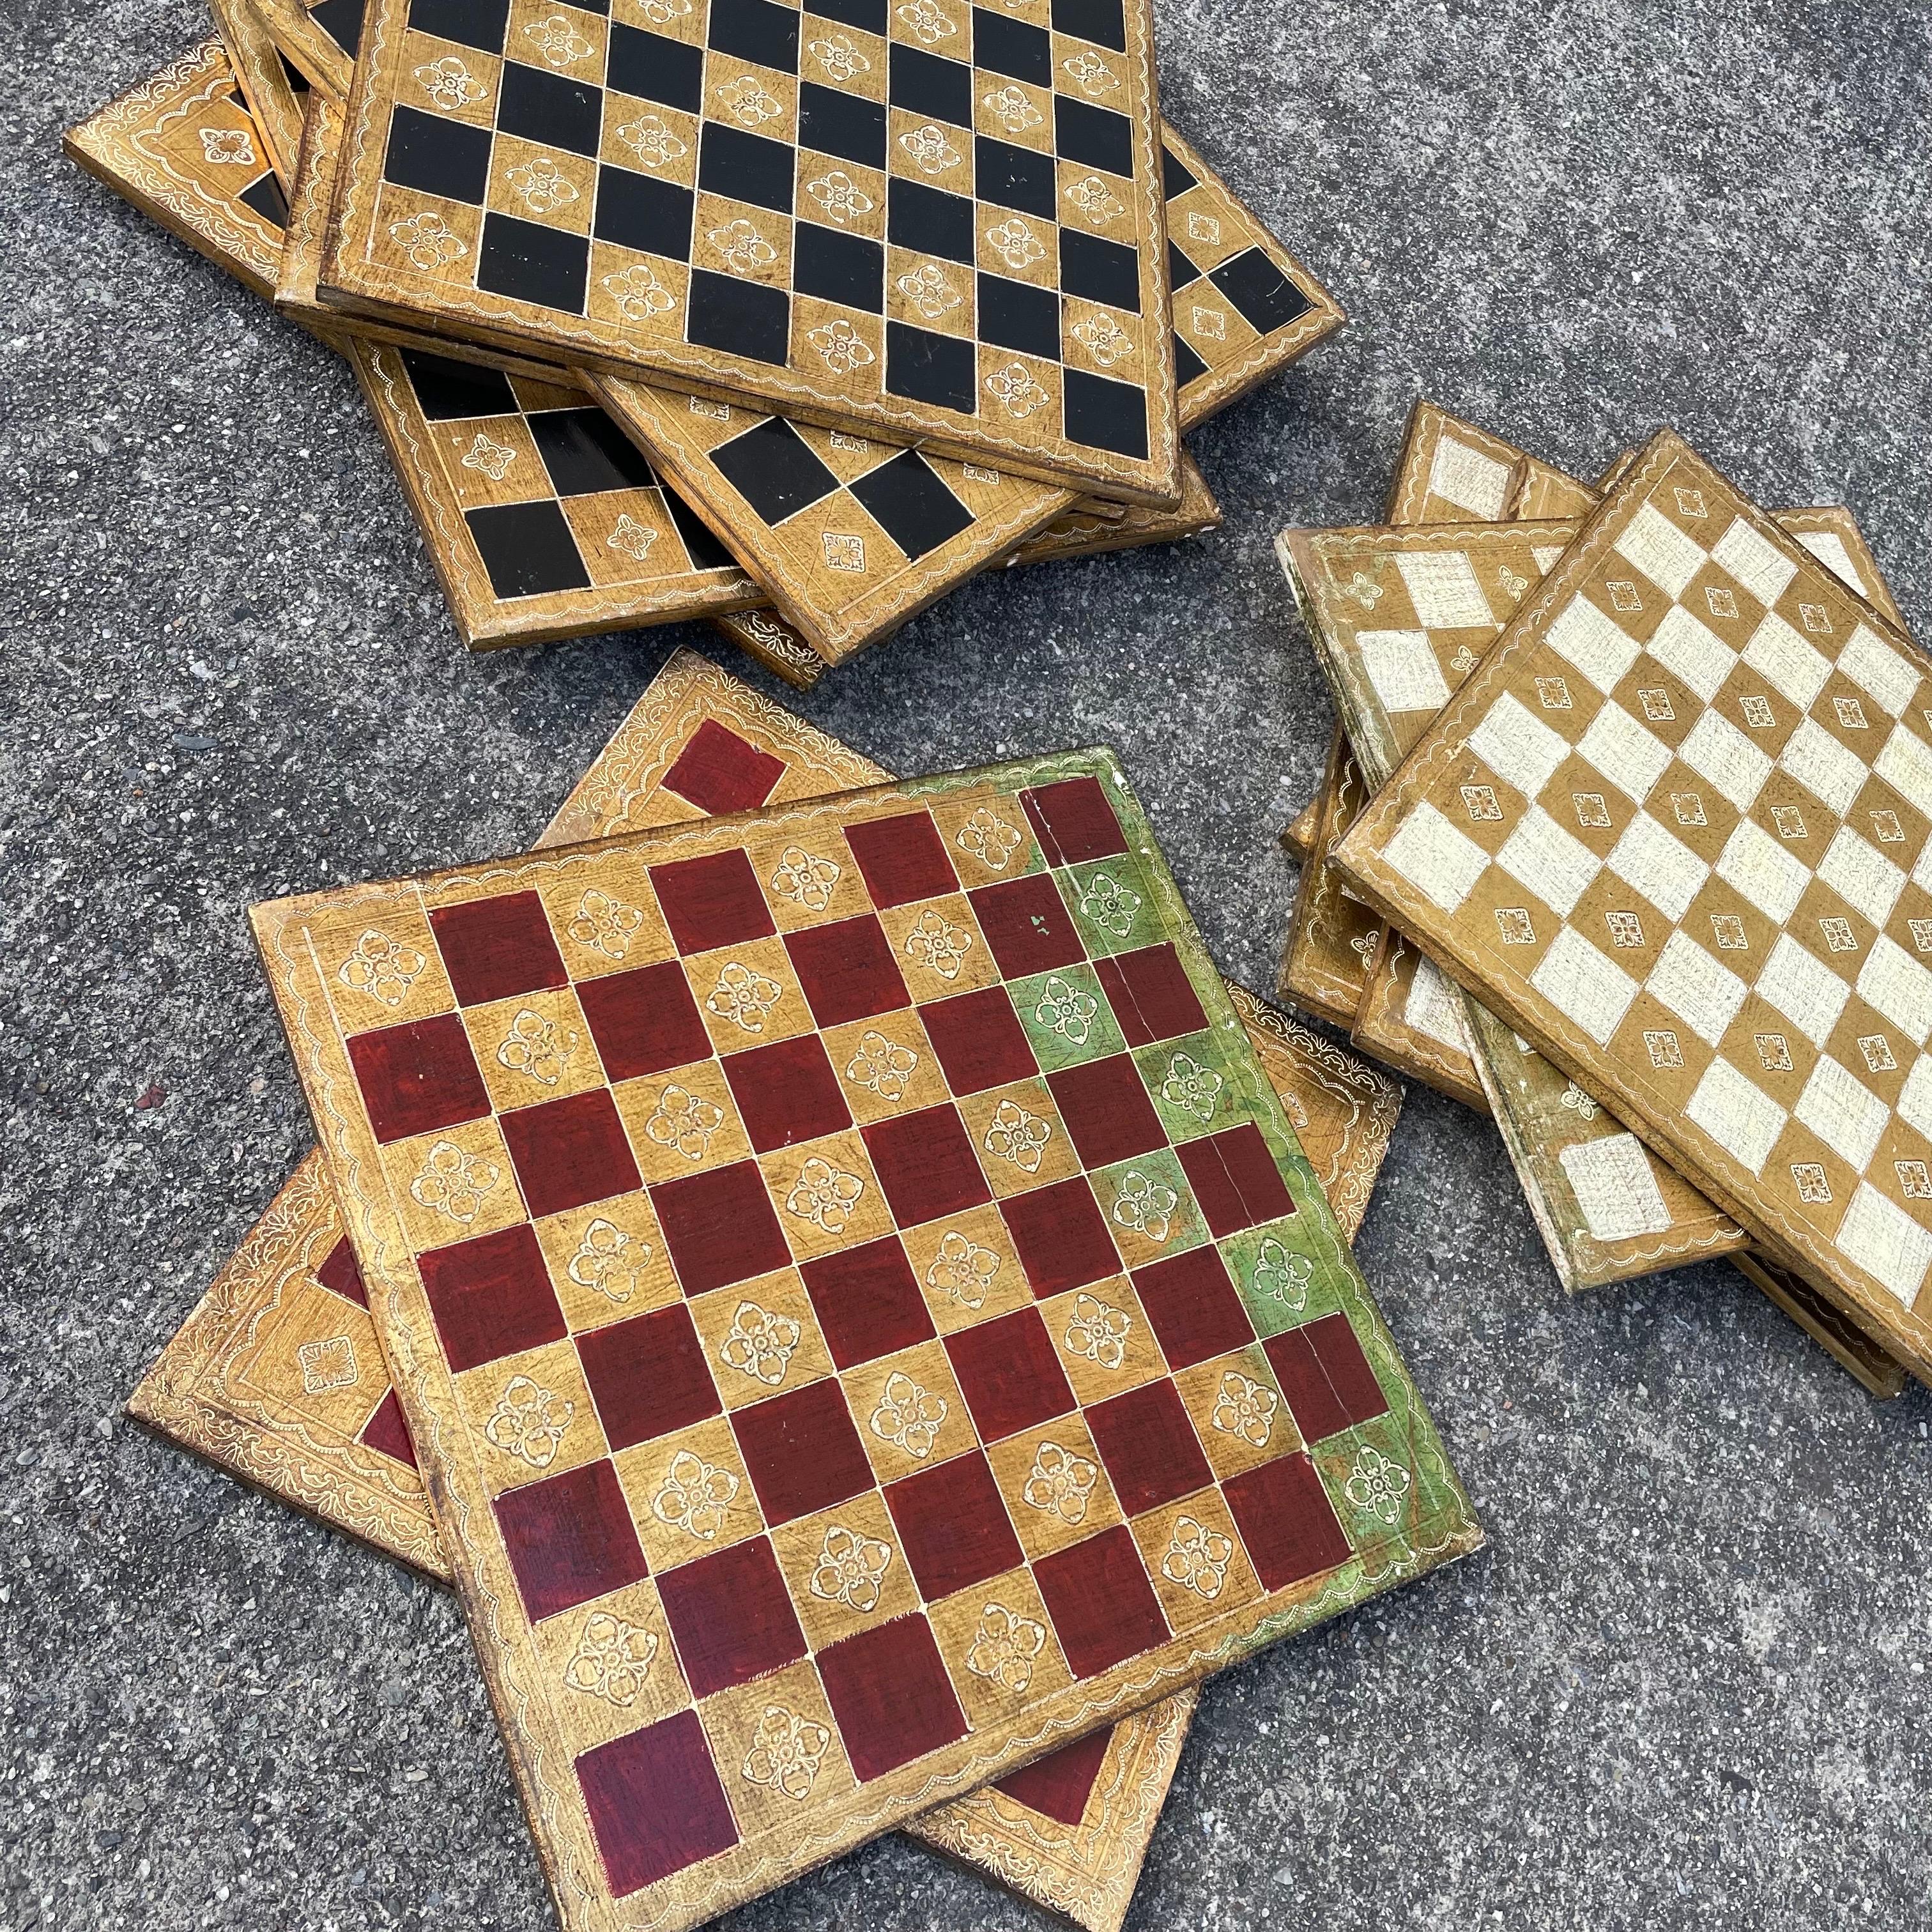 Beautiful hand painted wooden tiles with checkerboard pattern, 14 tiles in total, 2 red, 6 black and 6 gold. Great as a wall installation or a small space paneling, made in Italy.